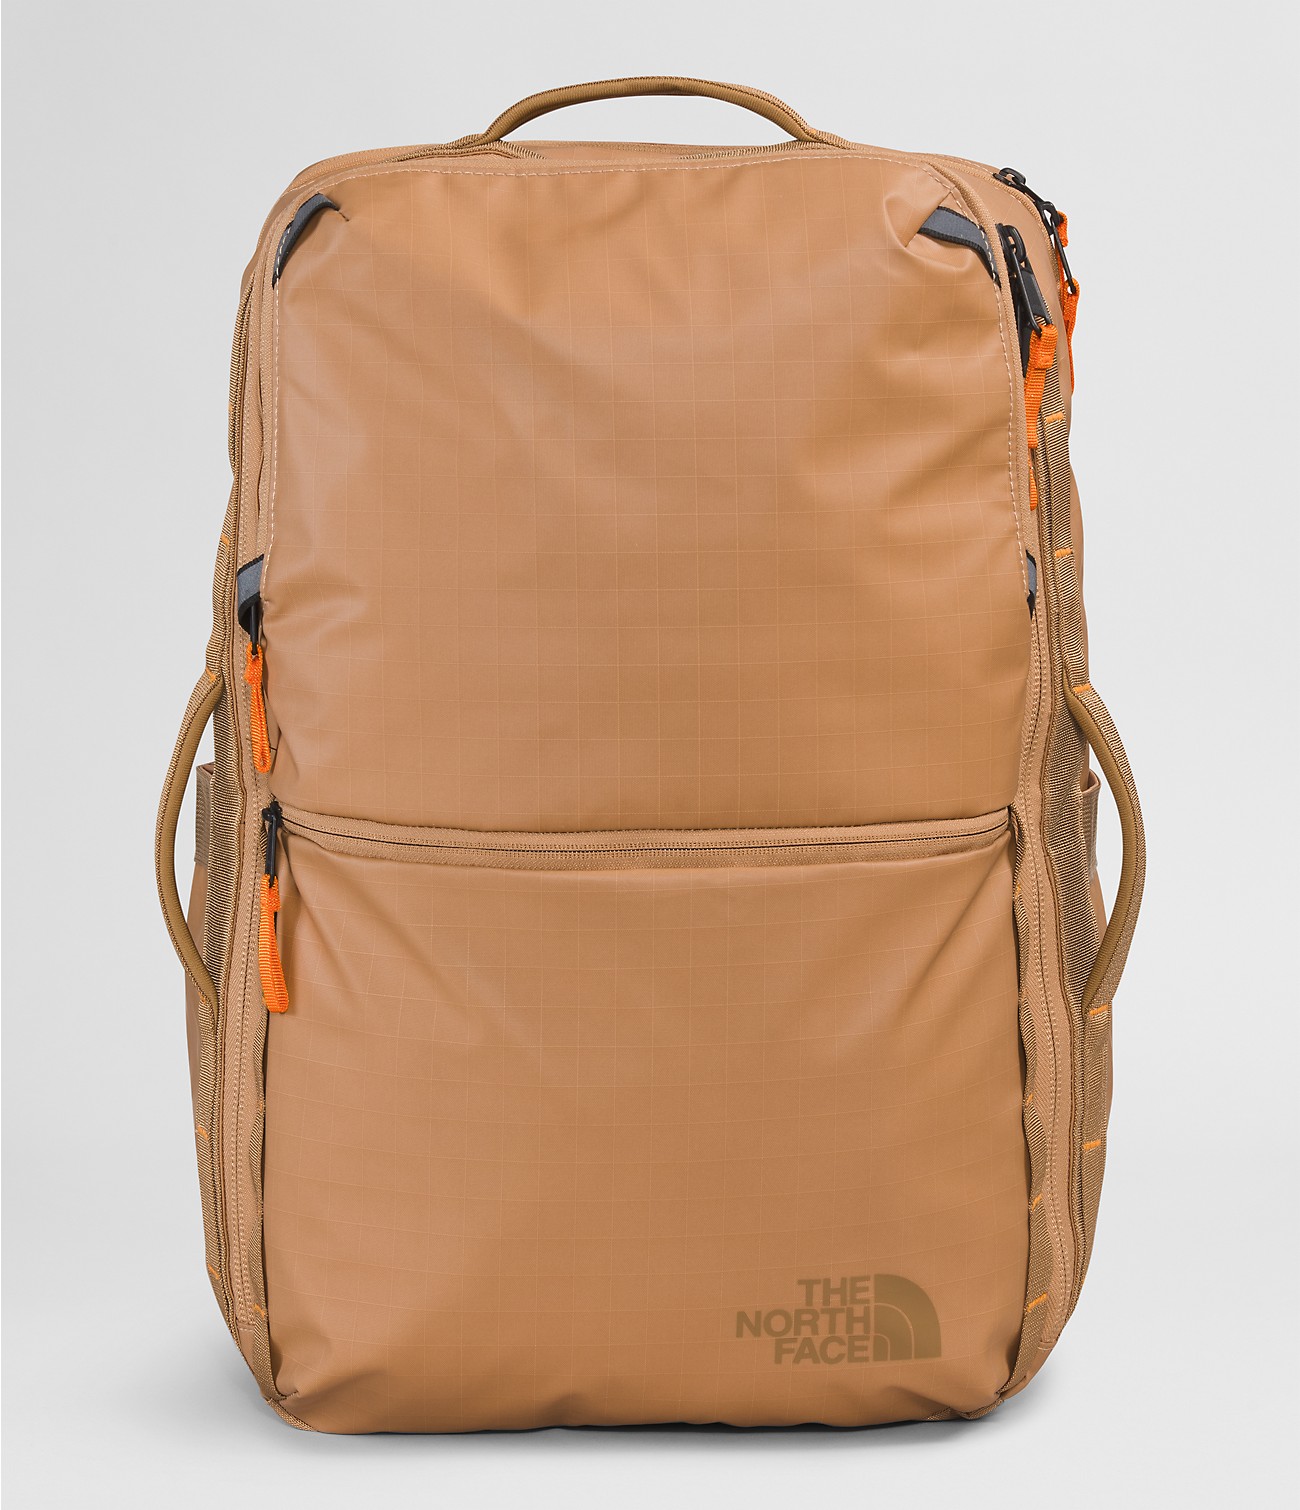 Unlock Wilderness' choice in the Decathlon Vs North Face comparison, the Base Camp Voyager Travel Pack by The North Face